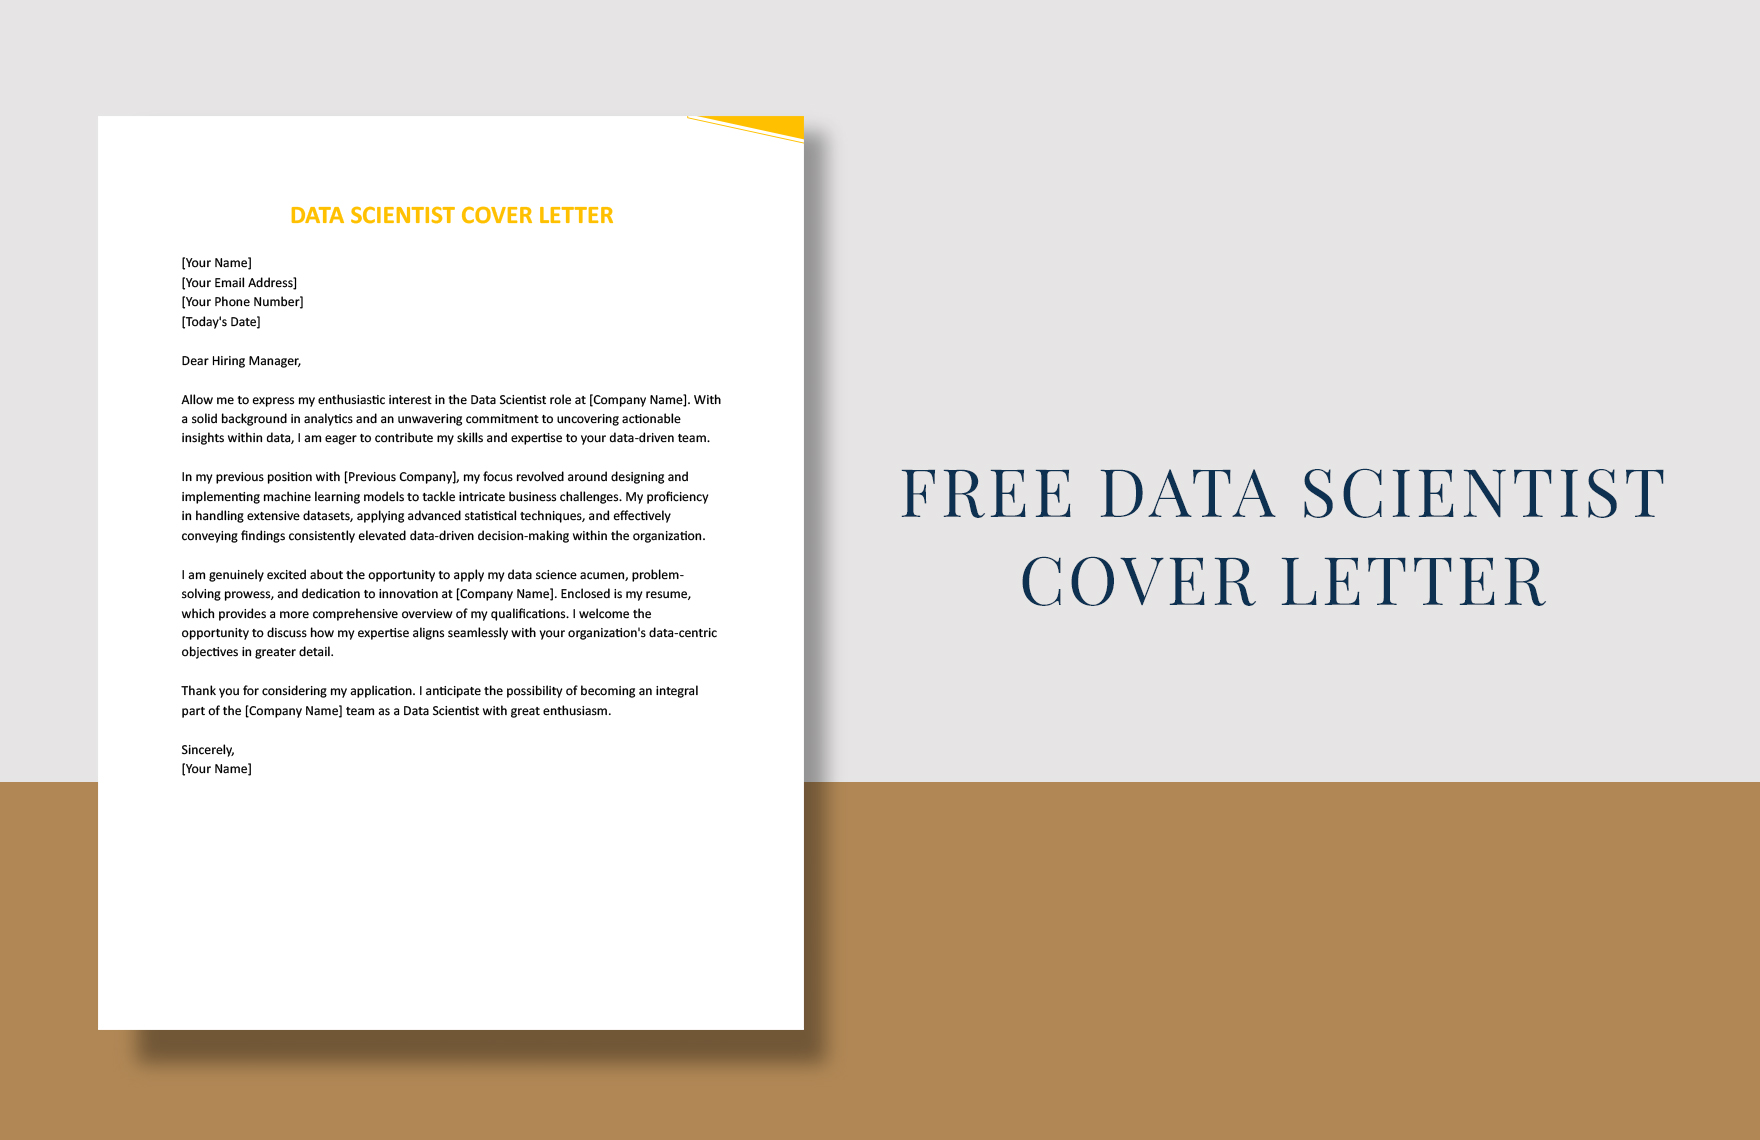 Data Scientist Cover Letter in Word, Google Docs